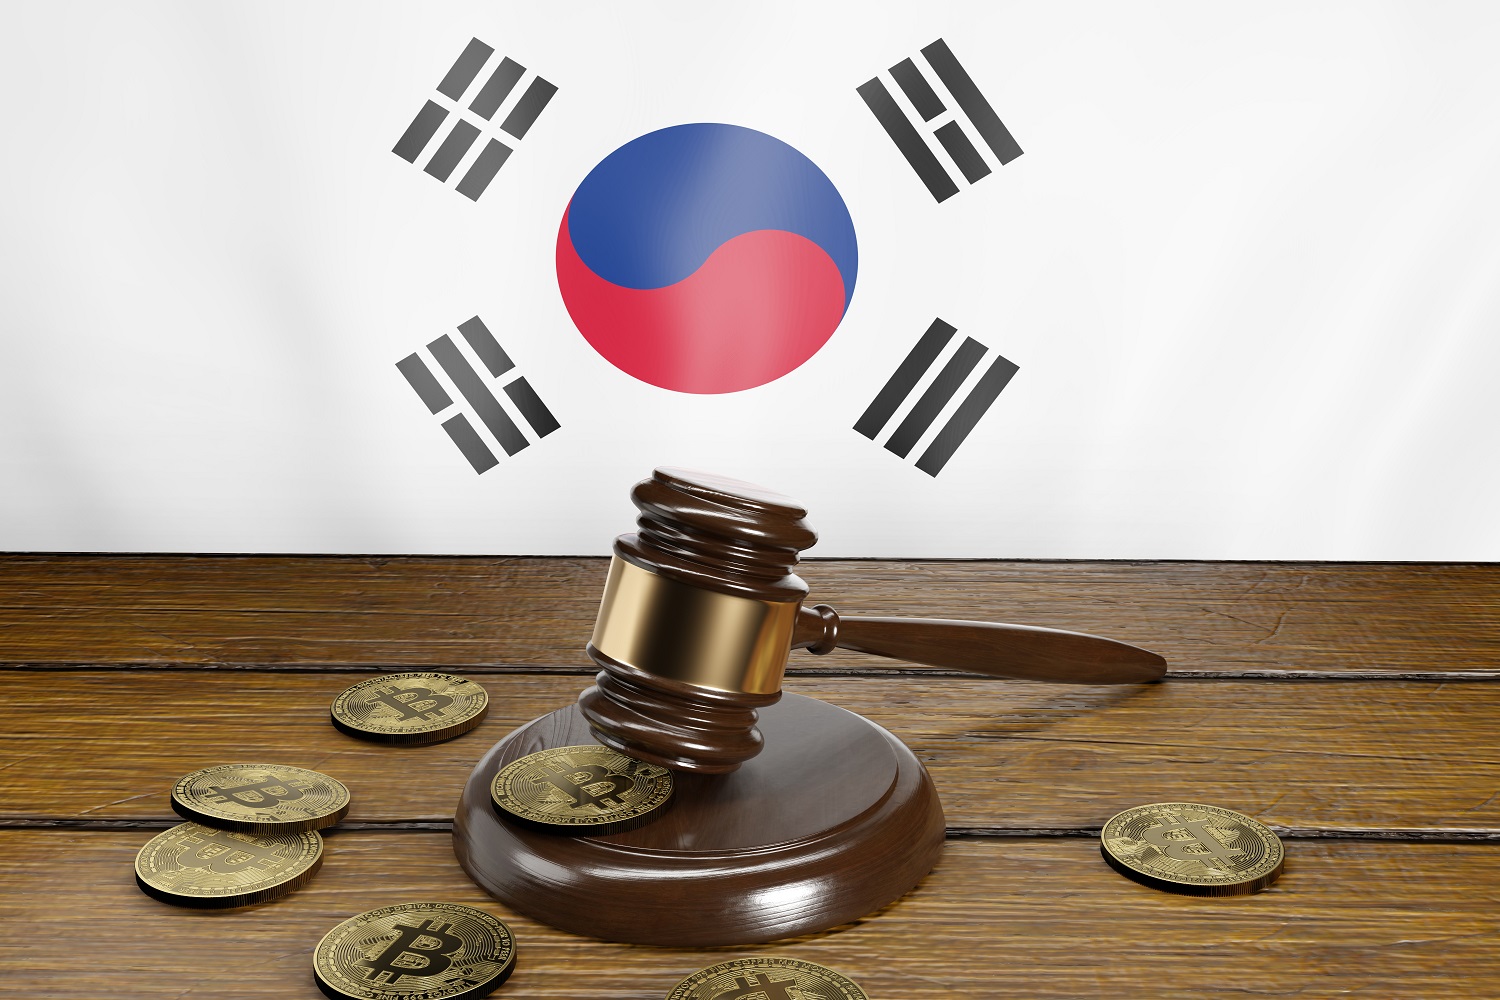 A gavel and block on a wooden table next to tokens intended to represent Bitcoin on the flag of South Korea.